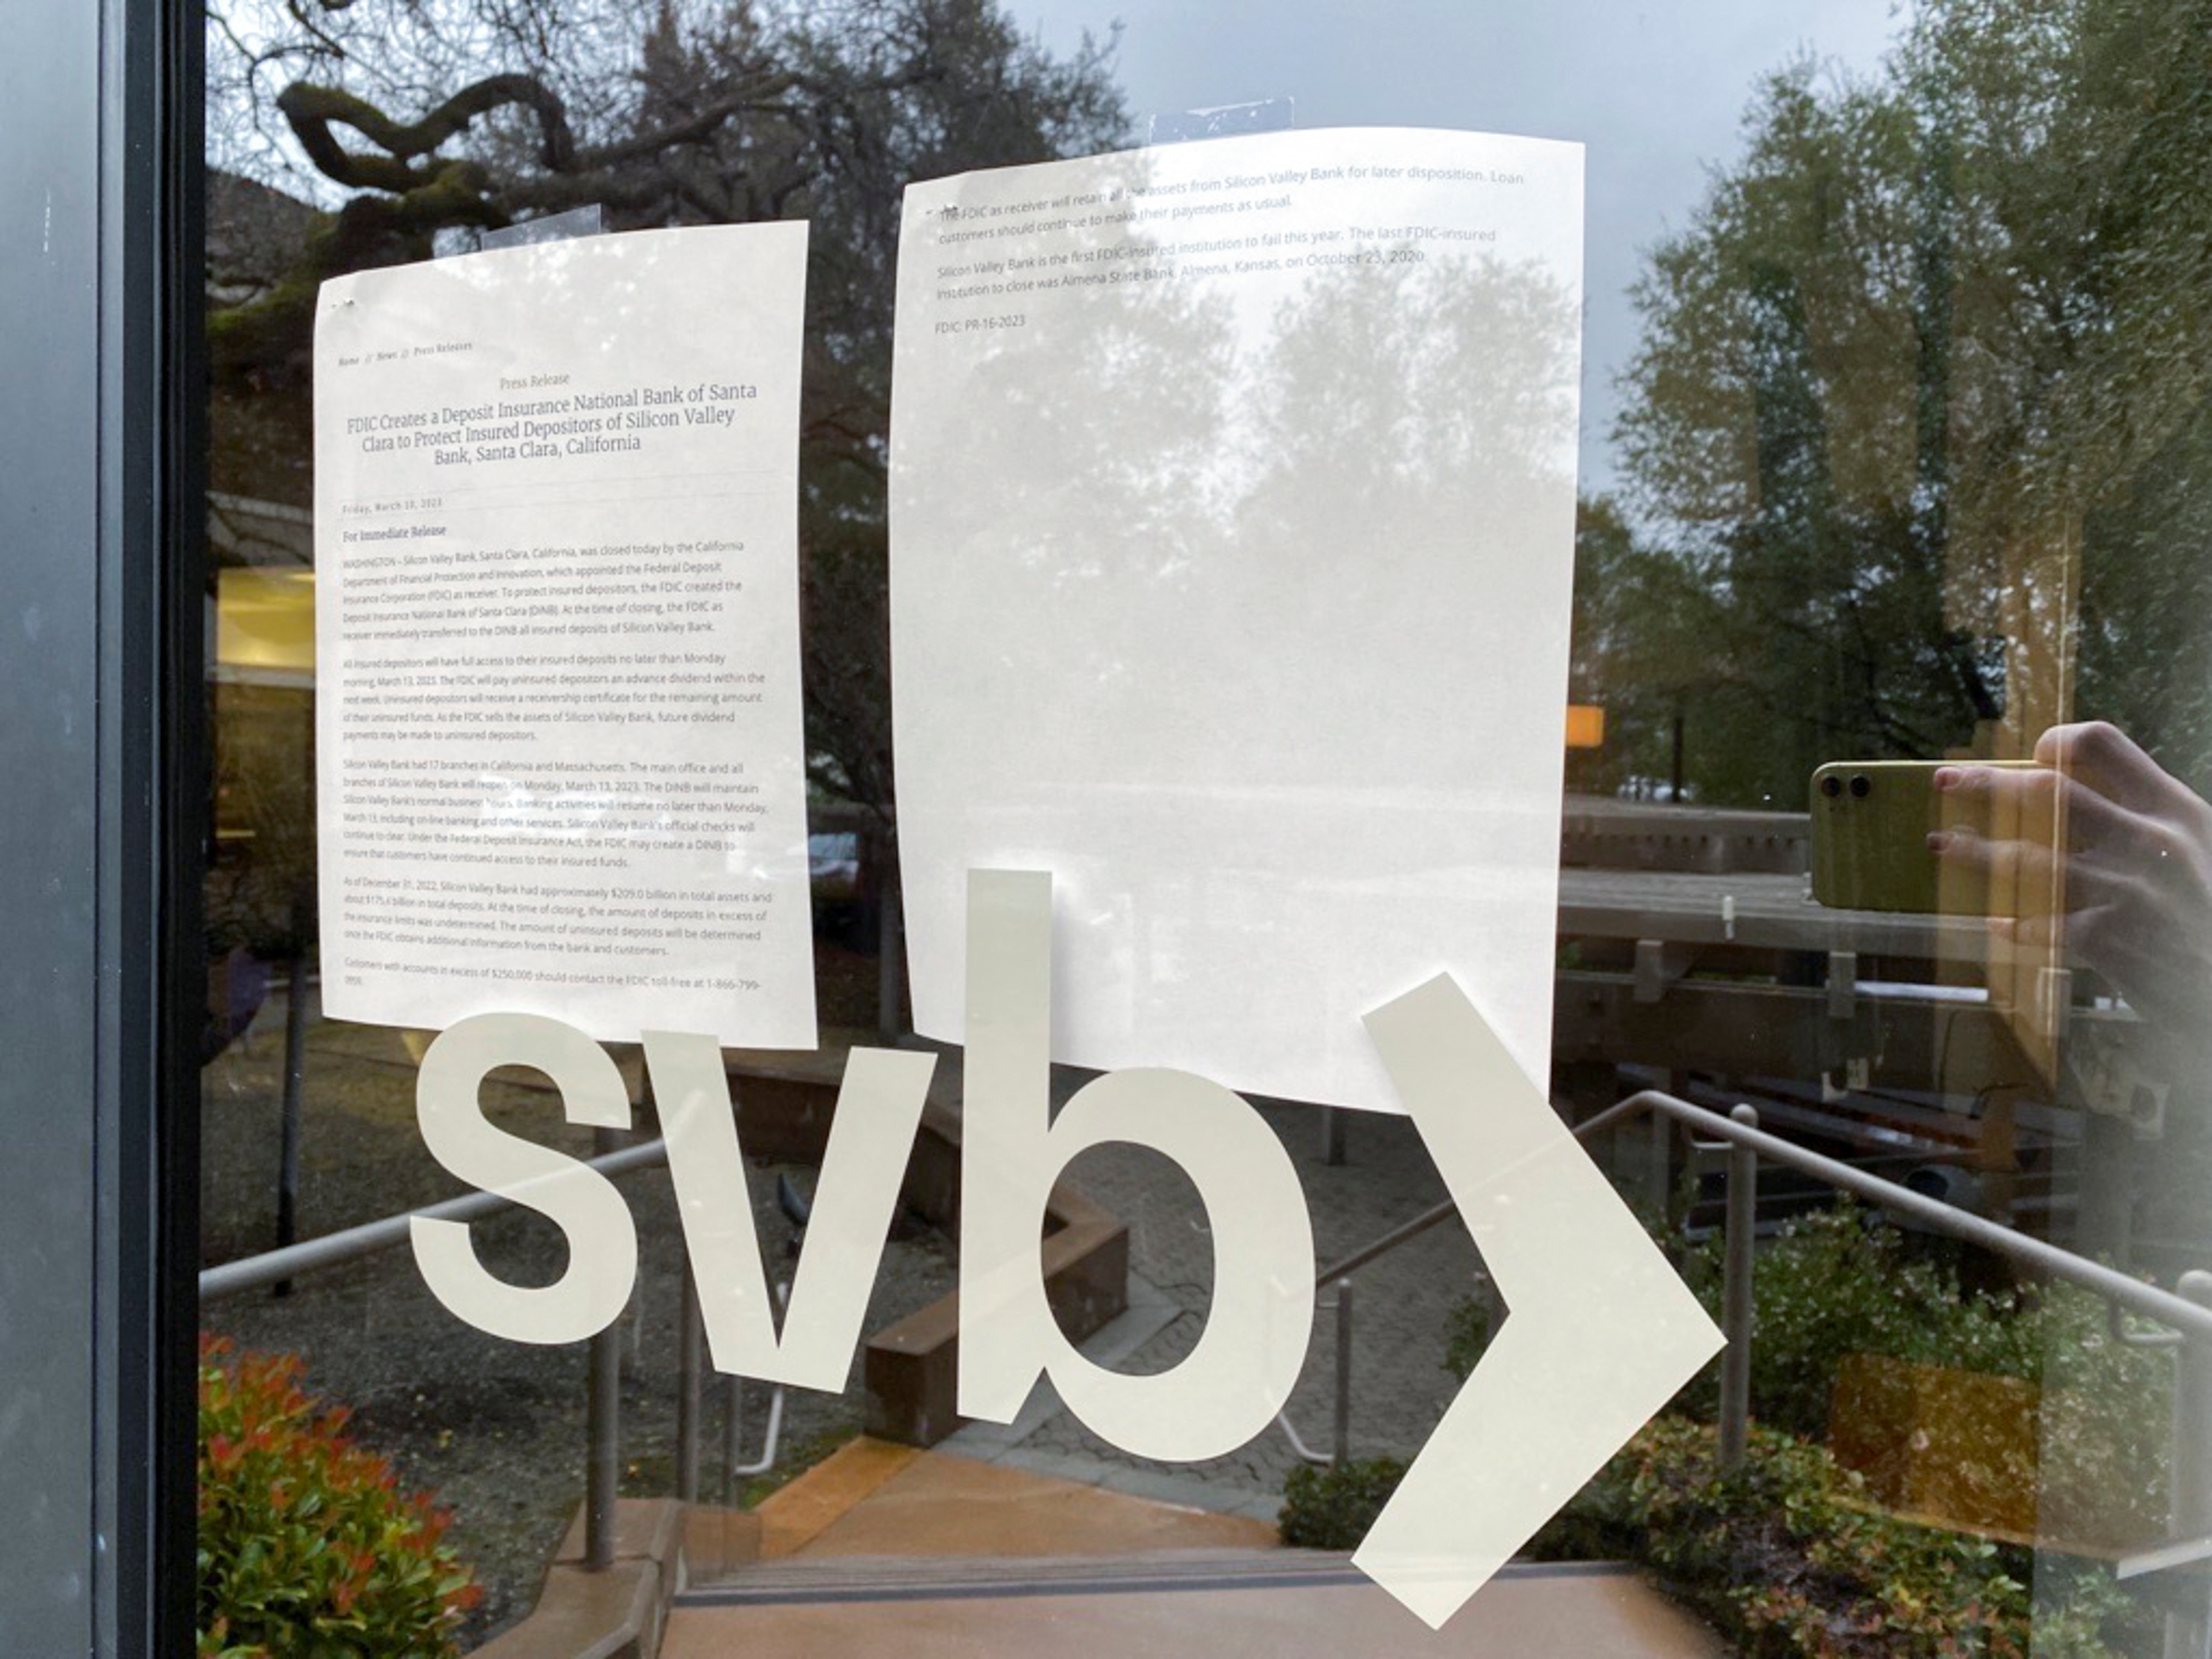 SVB is the biggest bank failure since the financial crisis in 2008